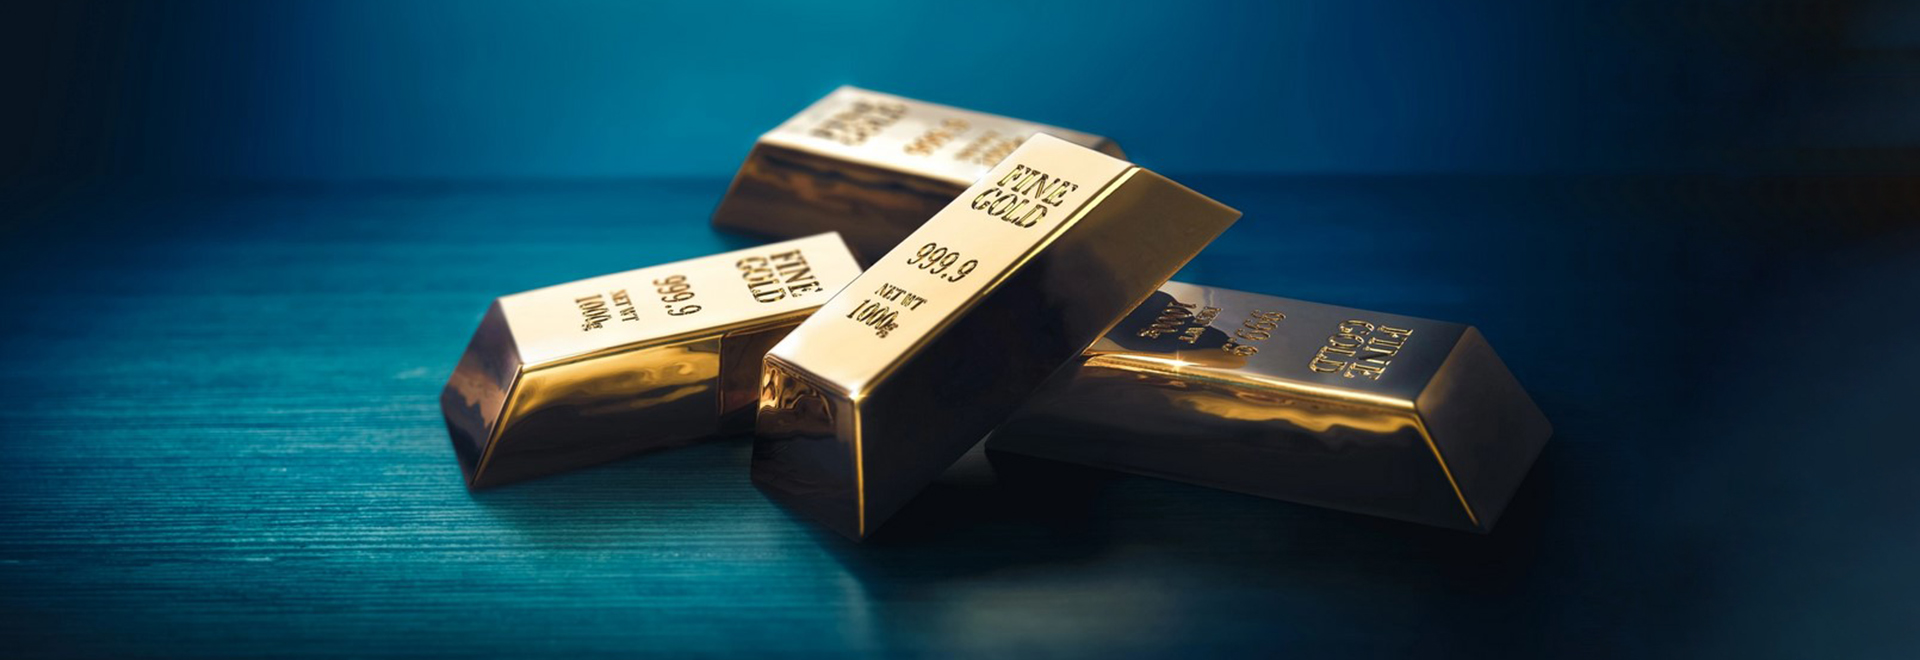 Debt Ceiling Drama Drives Gold Prices